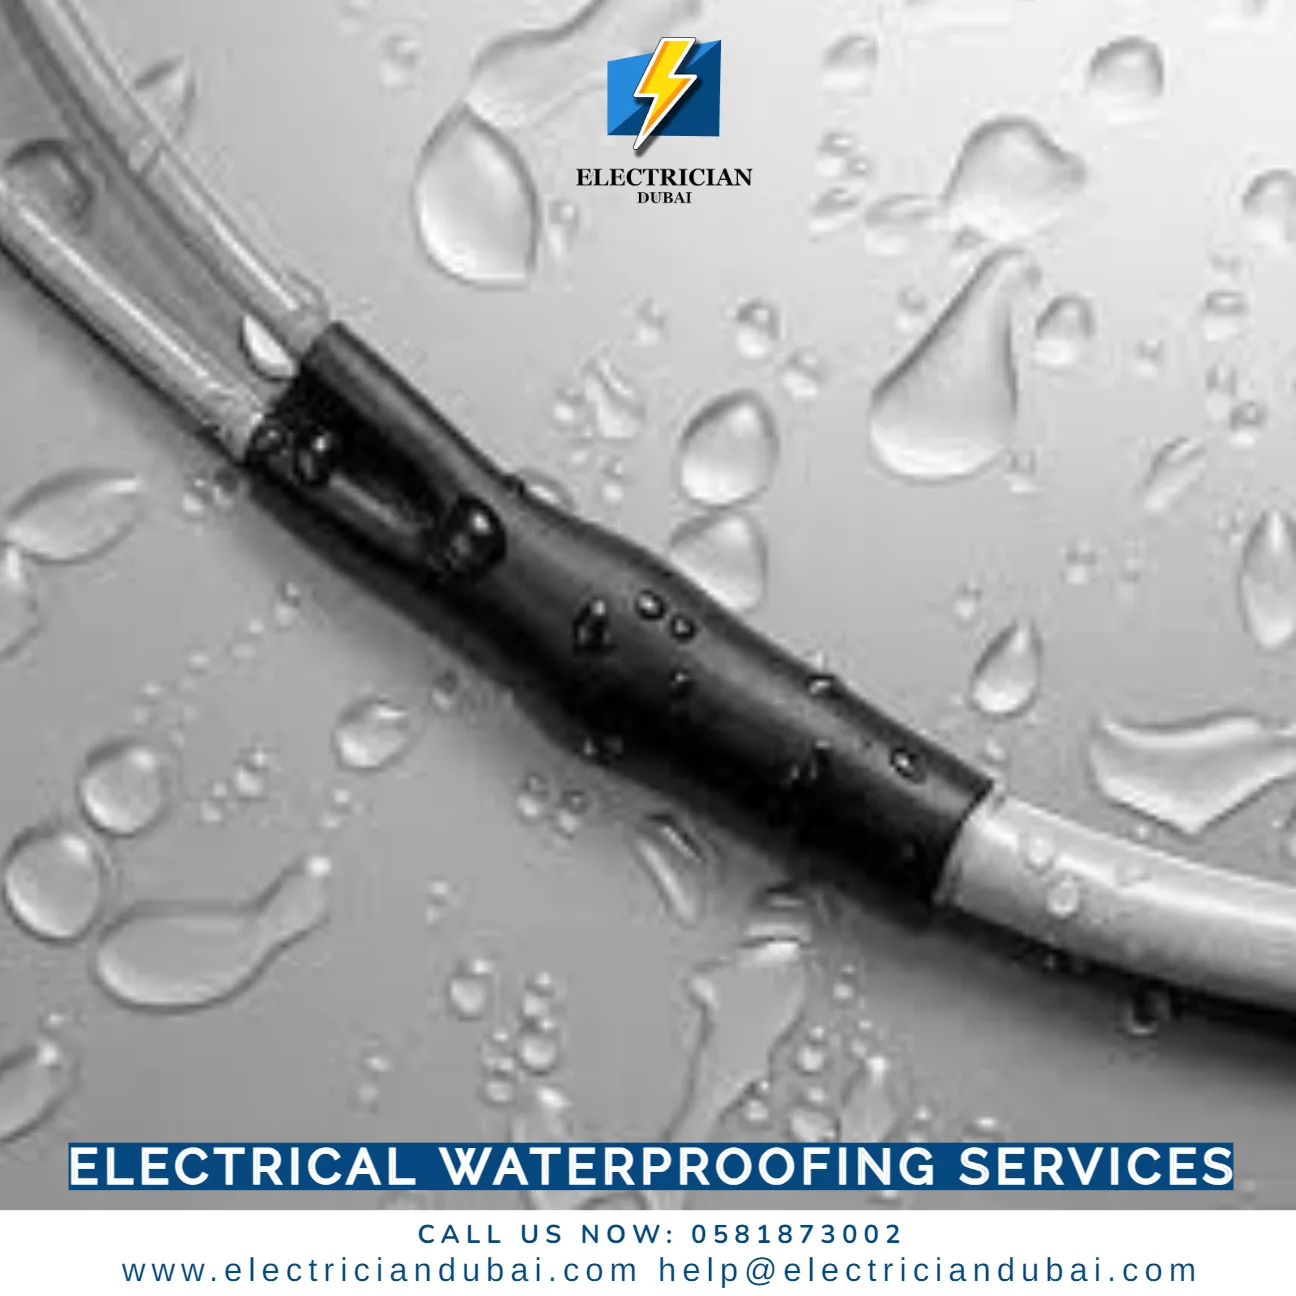 Electrical Waterproofing Services